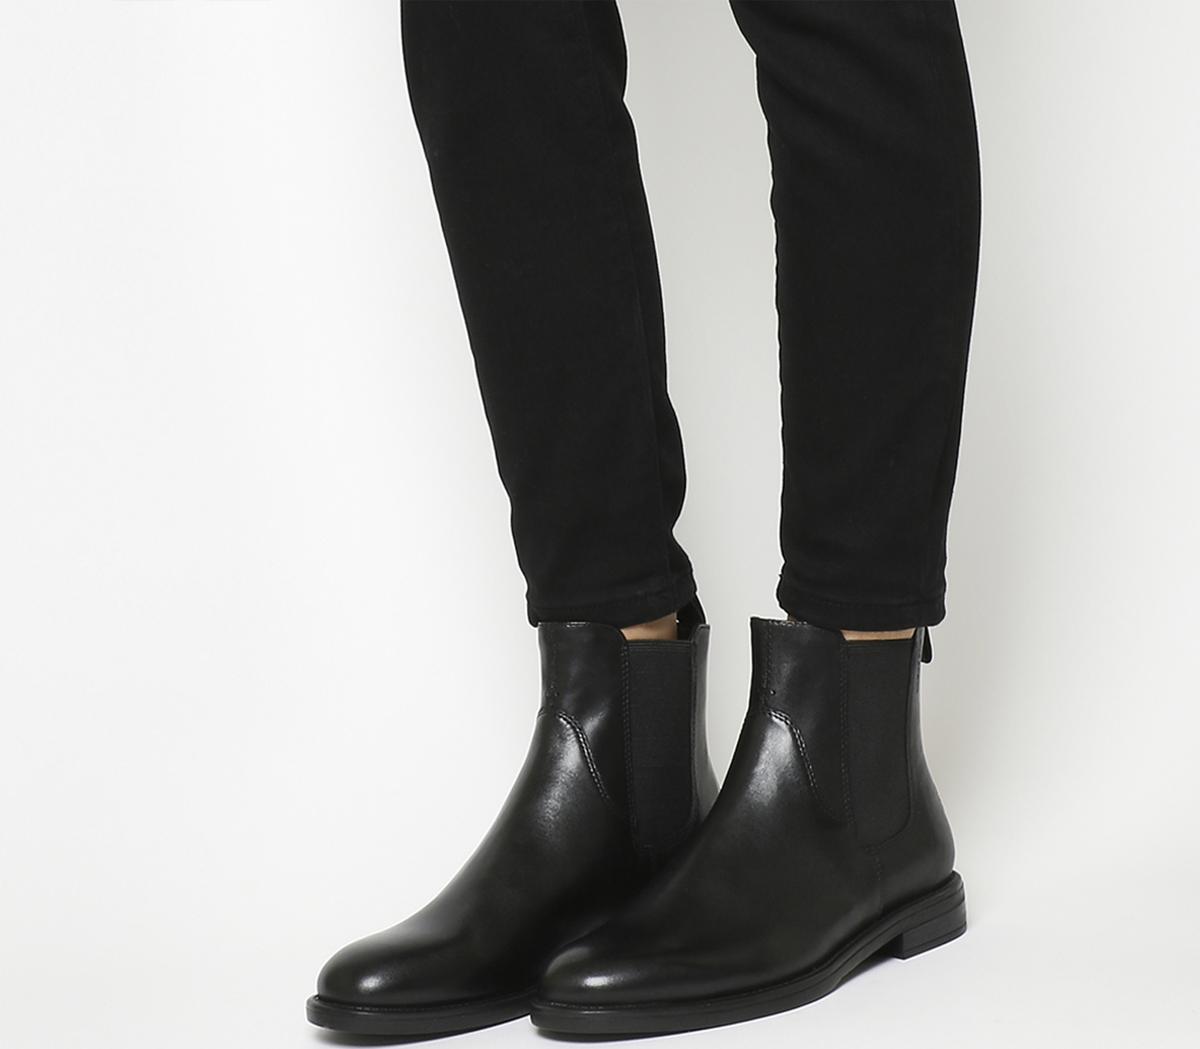 Vagabond Amina Chelsea Boots Black Leather - Ankle Boots